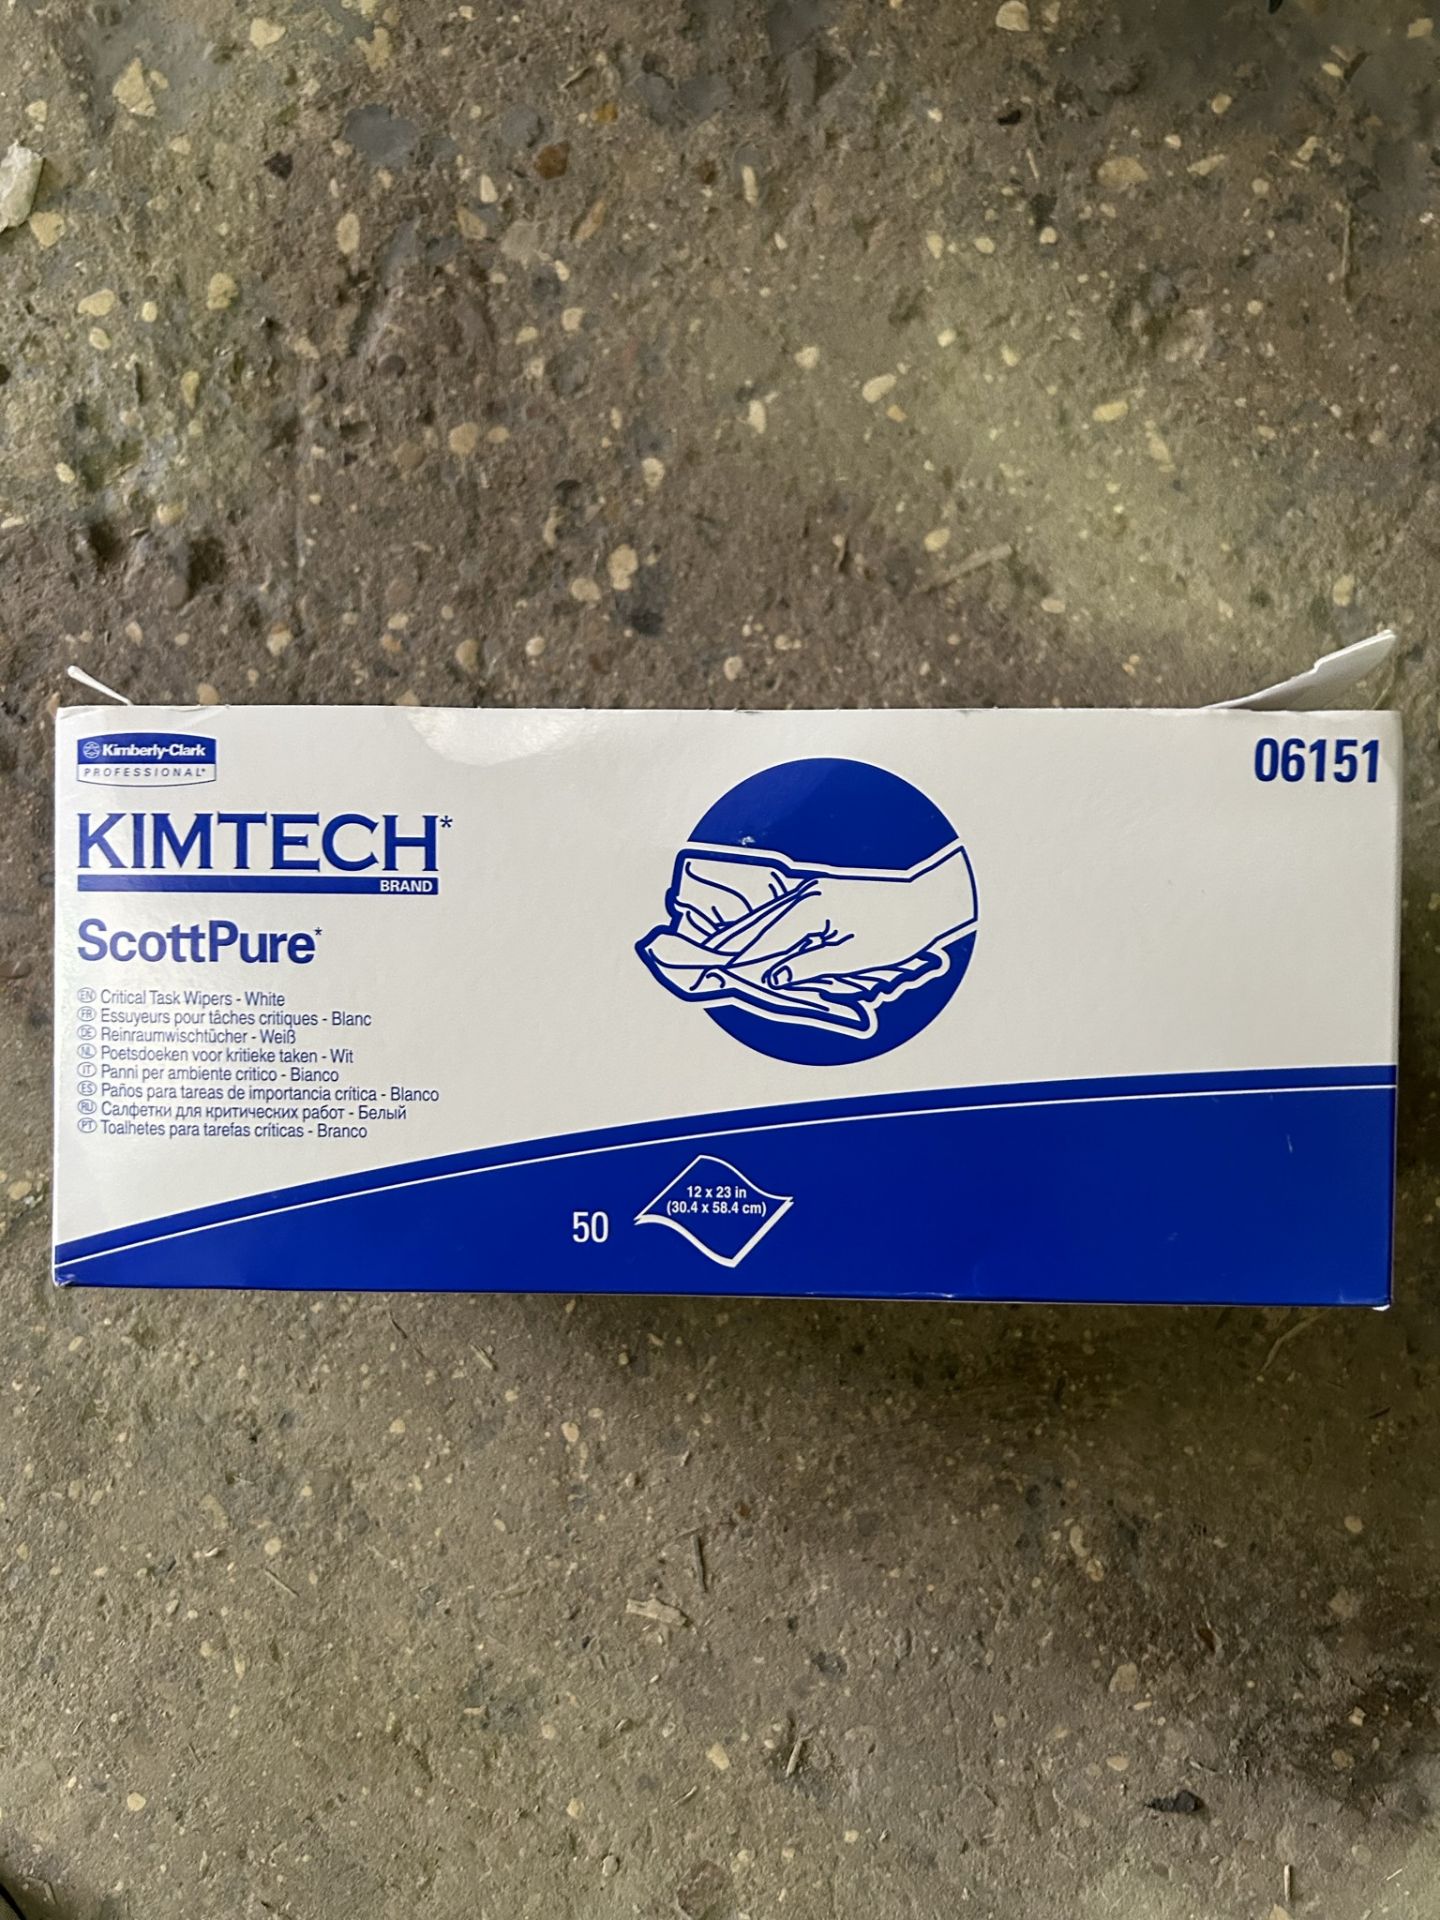 100x PACKS OF KIMTECH 06151 SCOTTPURE CRITICAL TASK WIPERS (EACH PACK CONTAINS 50 WIPES) BRAND NEW - Image 3 of 3